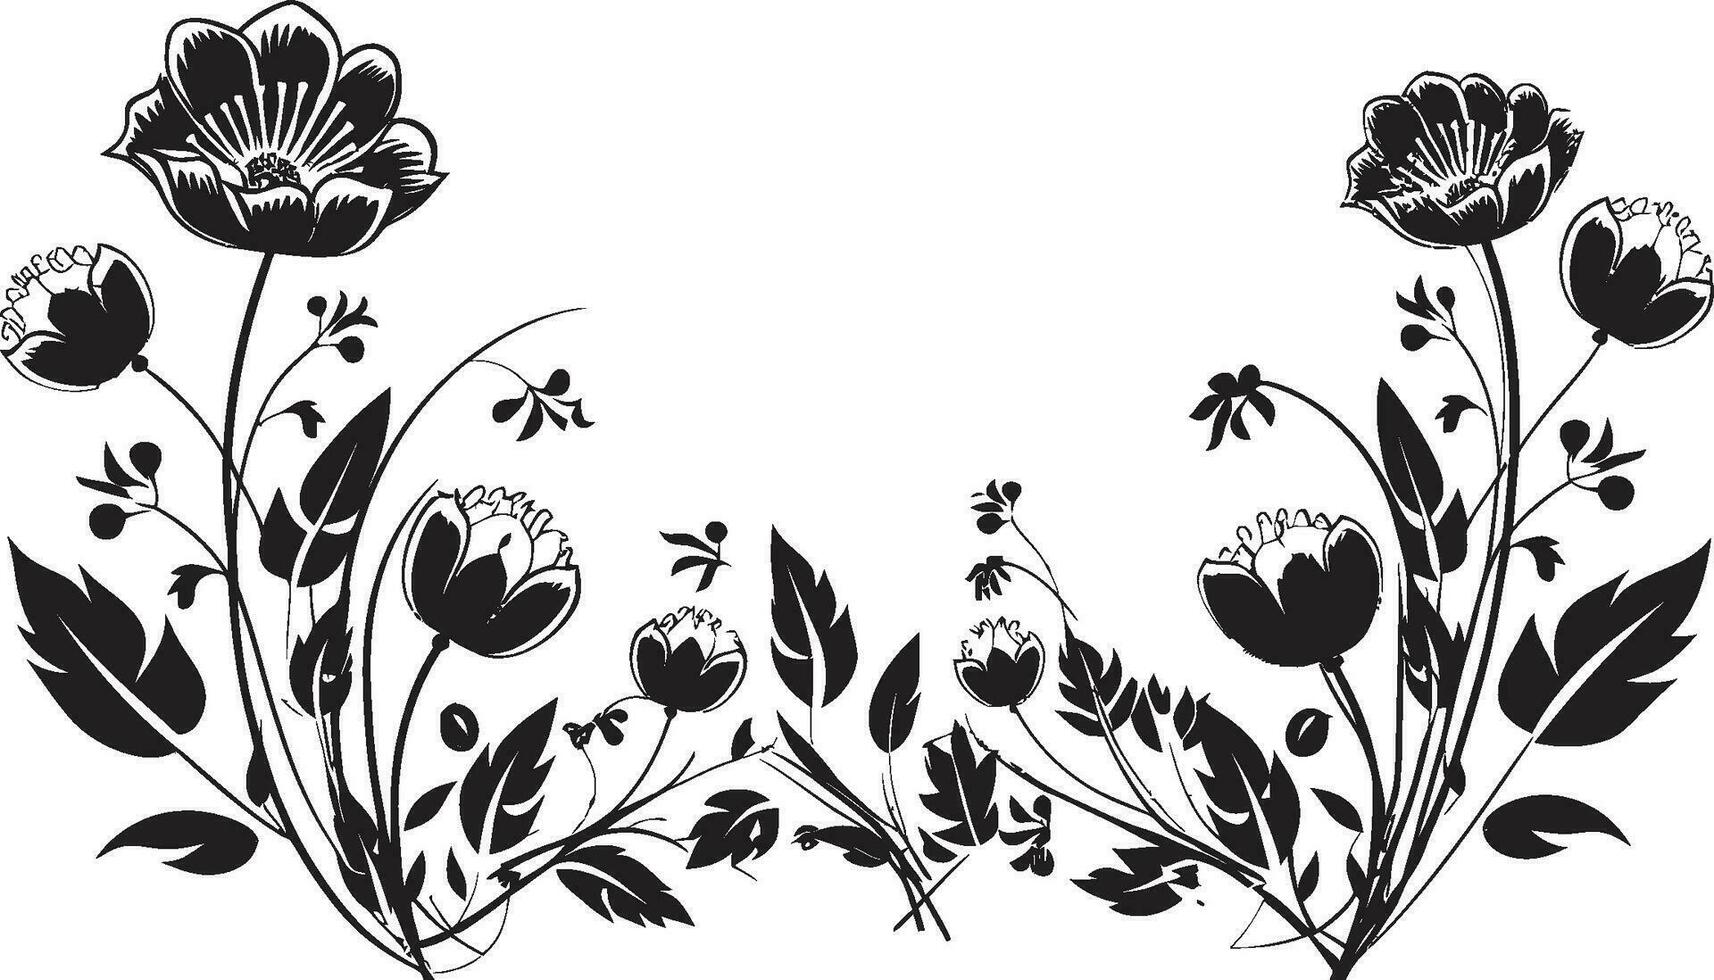 Graphite Floral Essence Ornamental Logo Iconography Noir Blossom Enchantment Inviting Vector Floral Accents